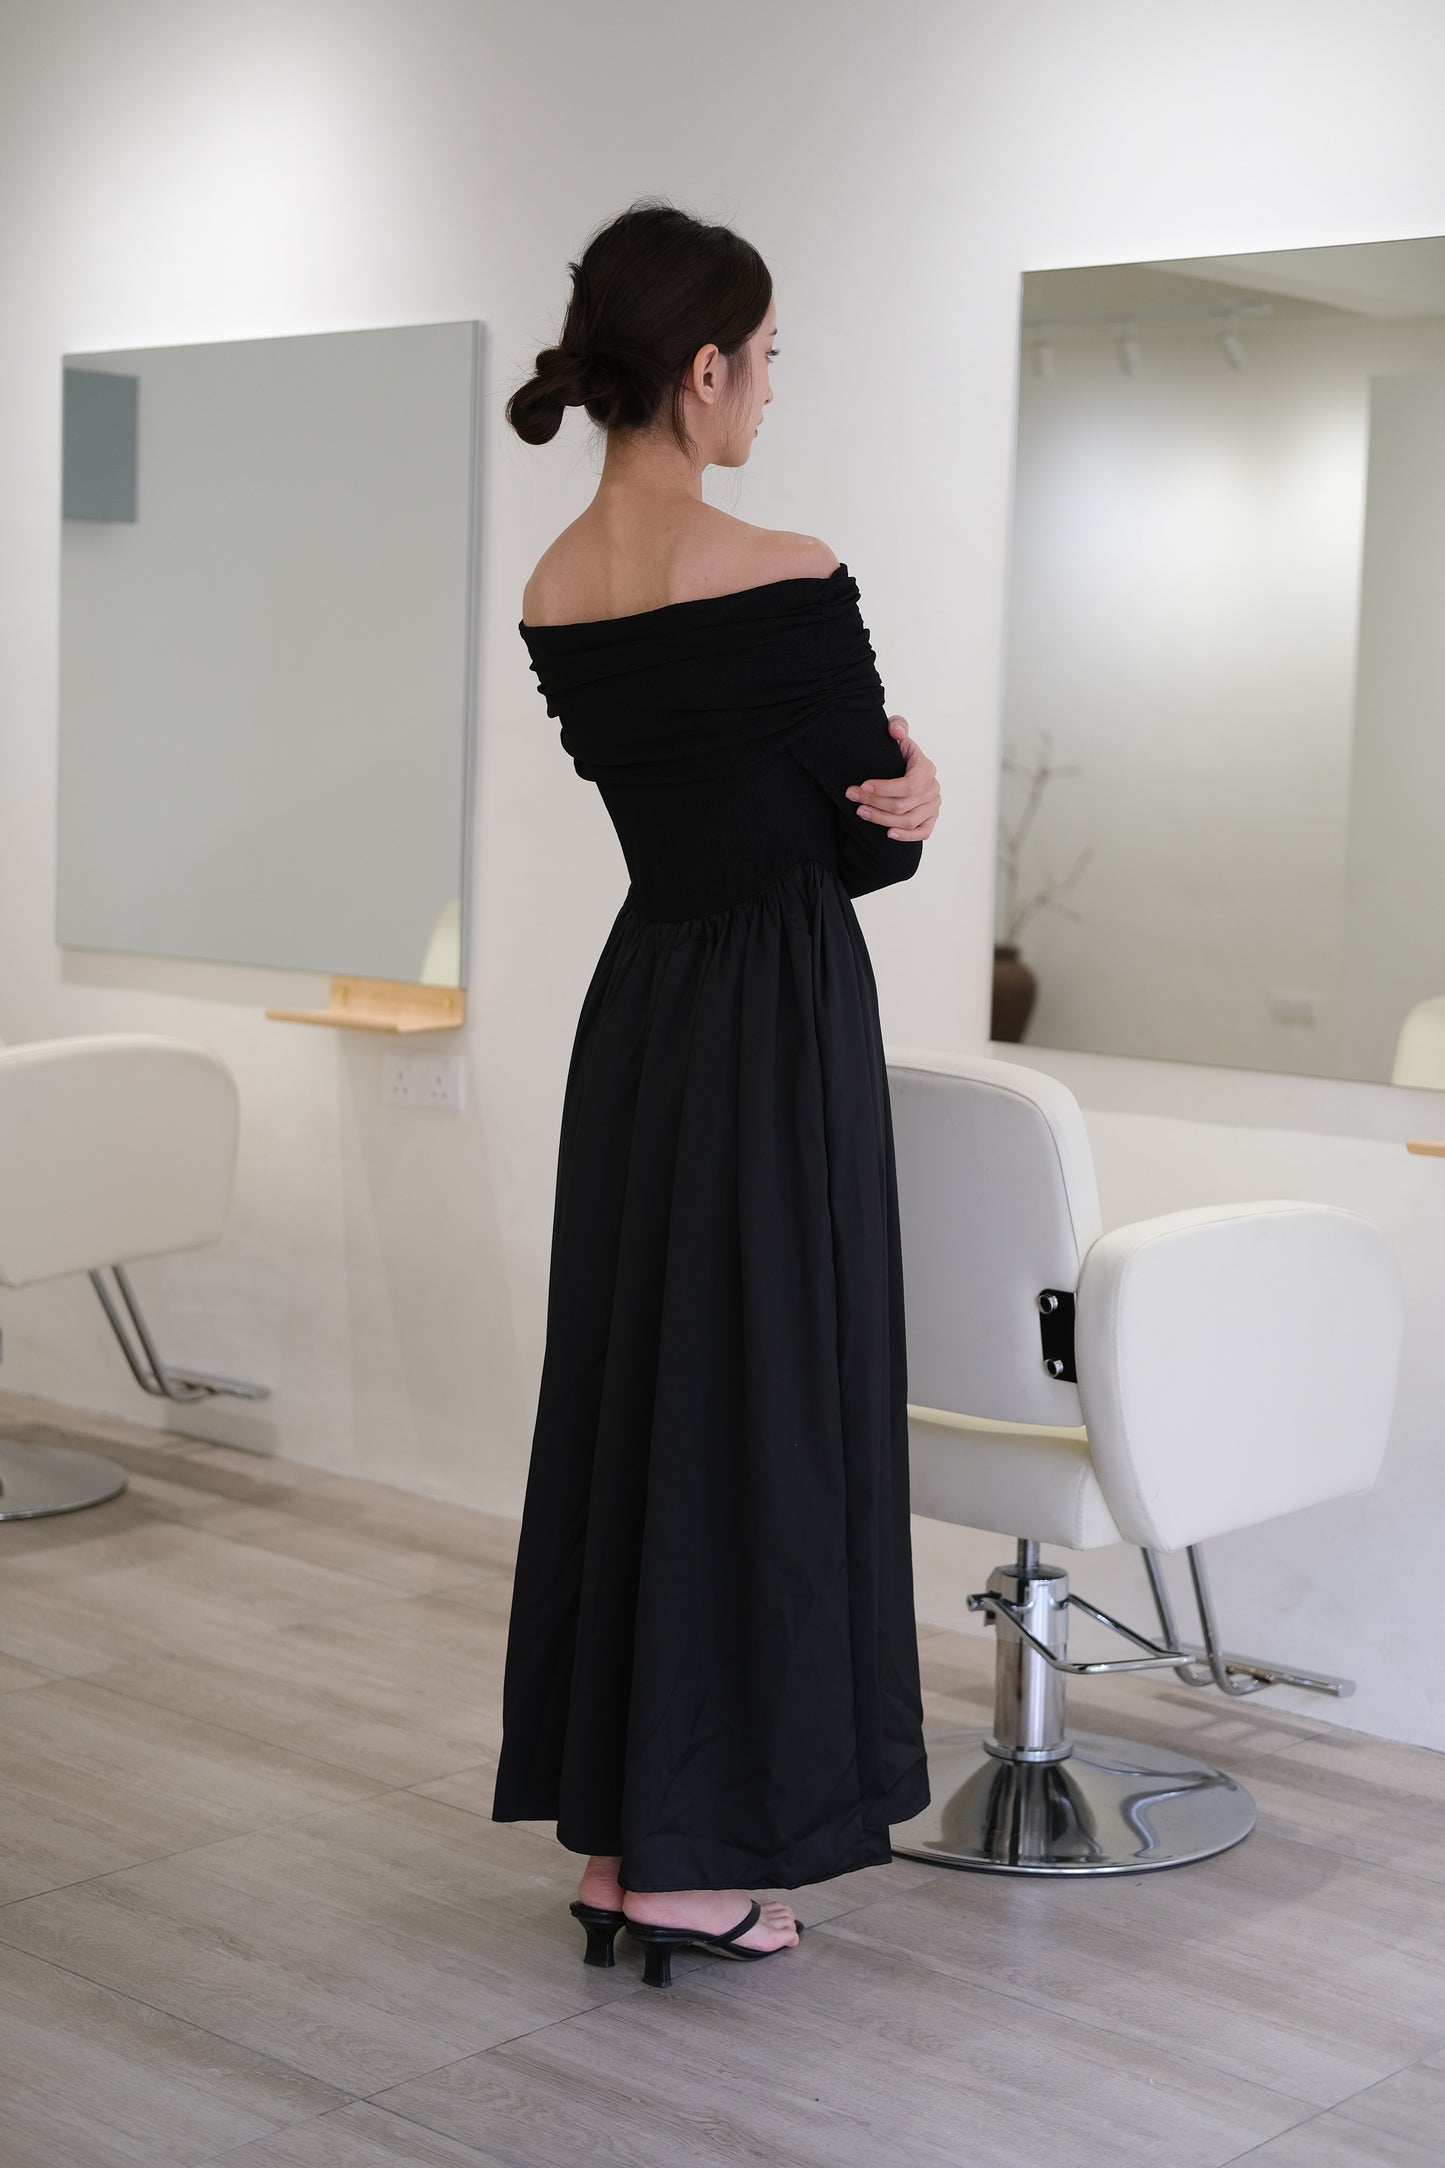 Off-the-shoulder long-sleeved dress in classic black